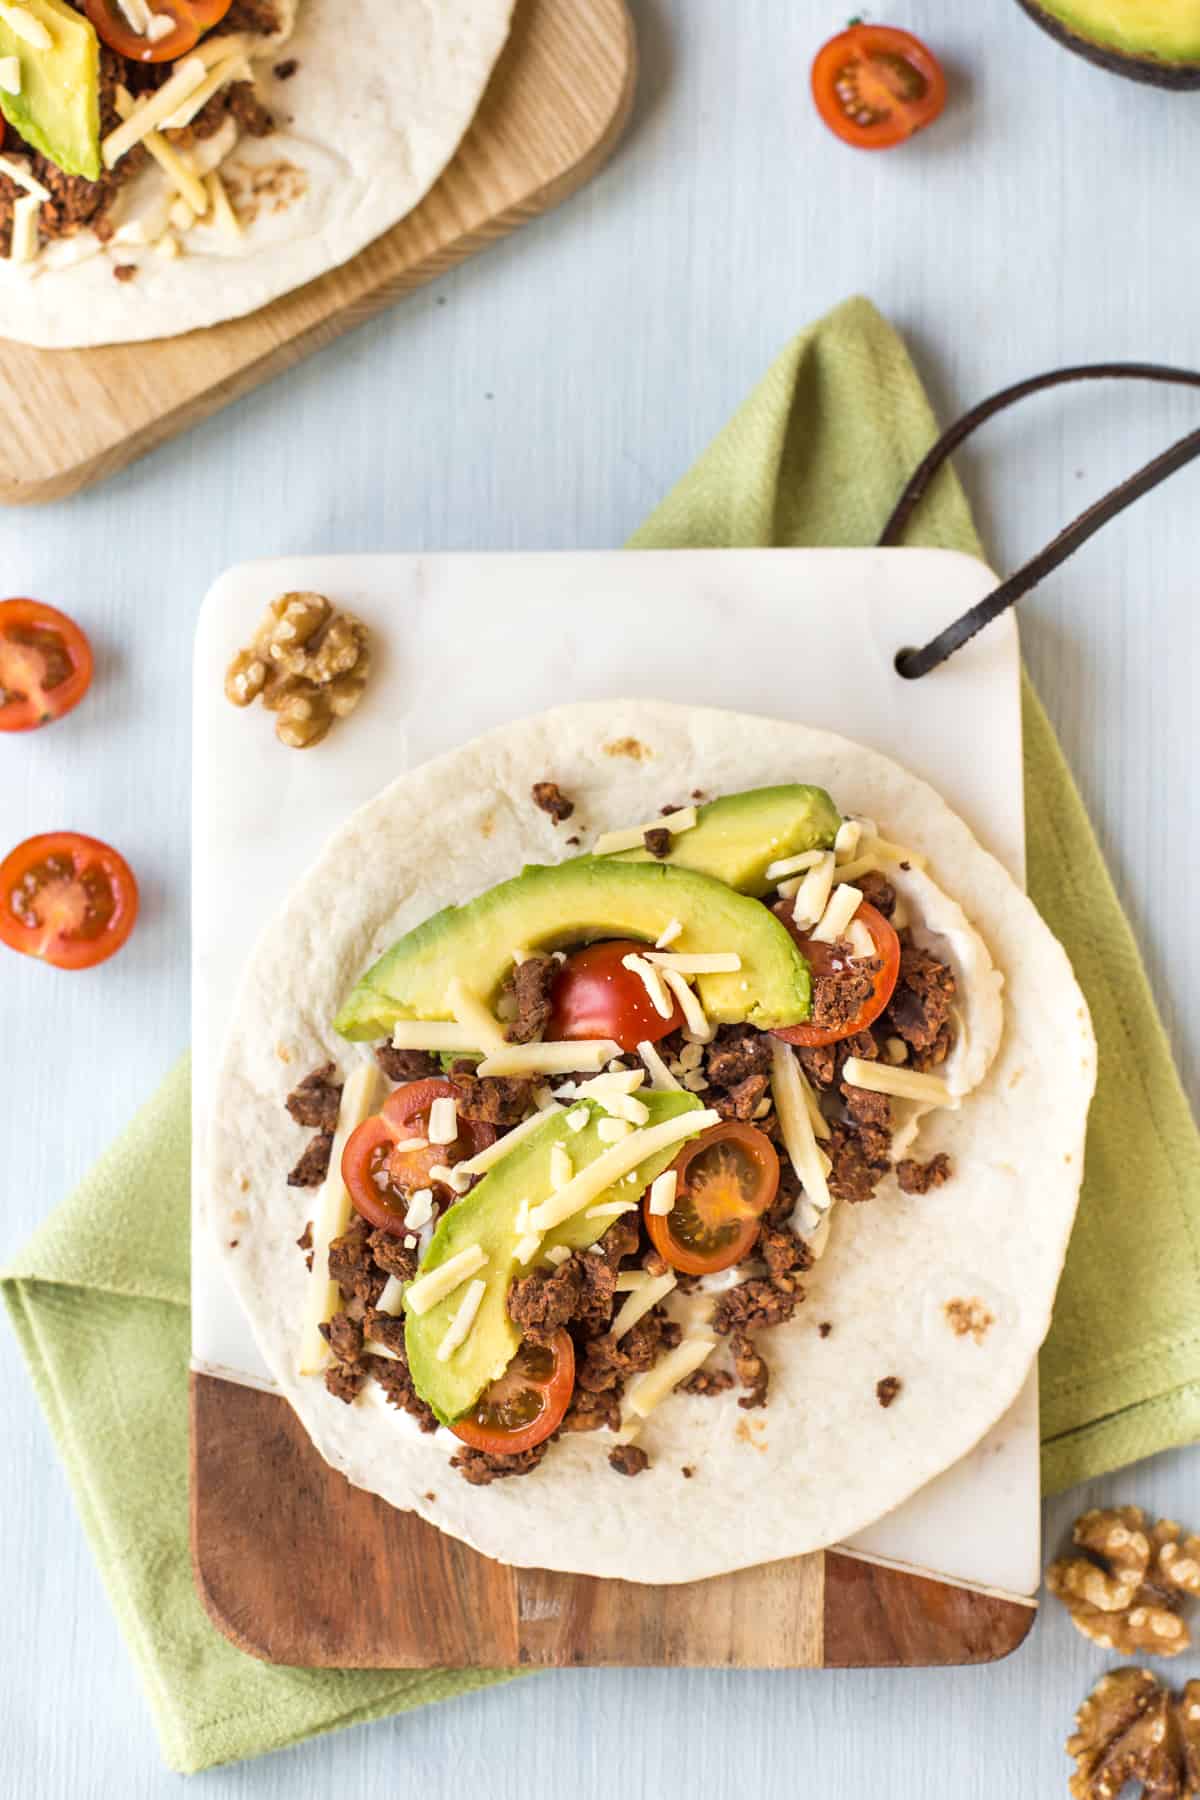 A vegetarian black bean taco topped with avocado and tomatoes.